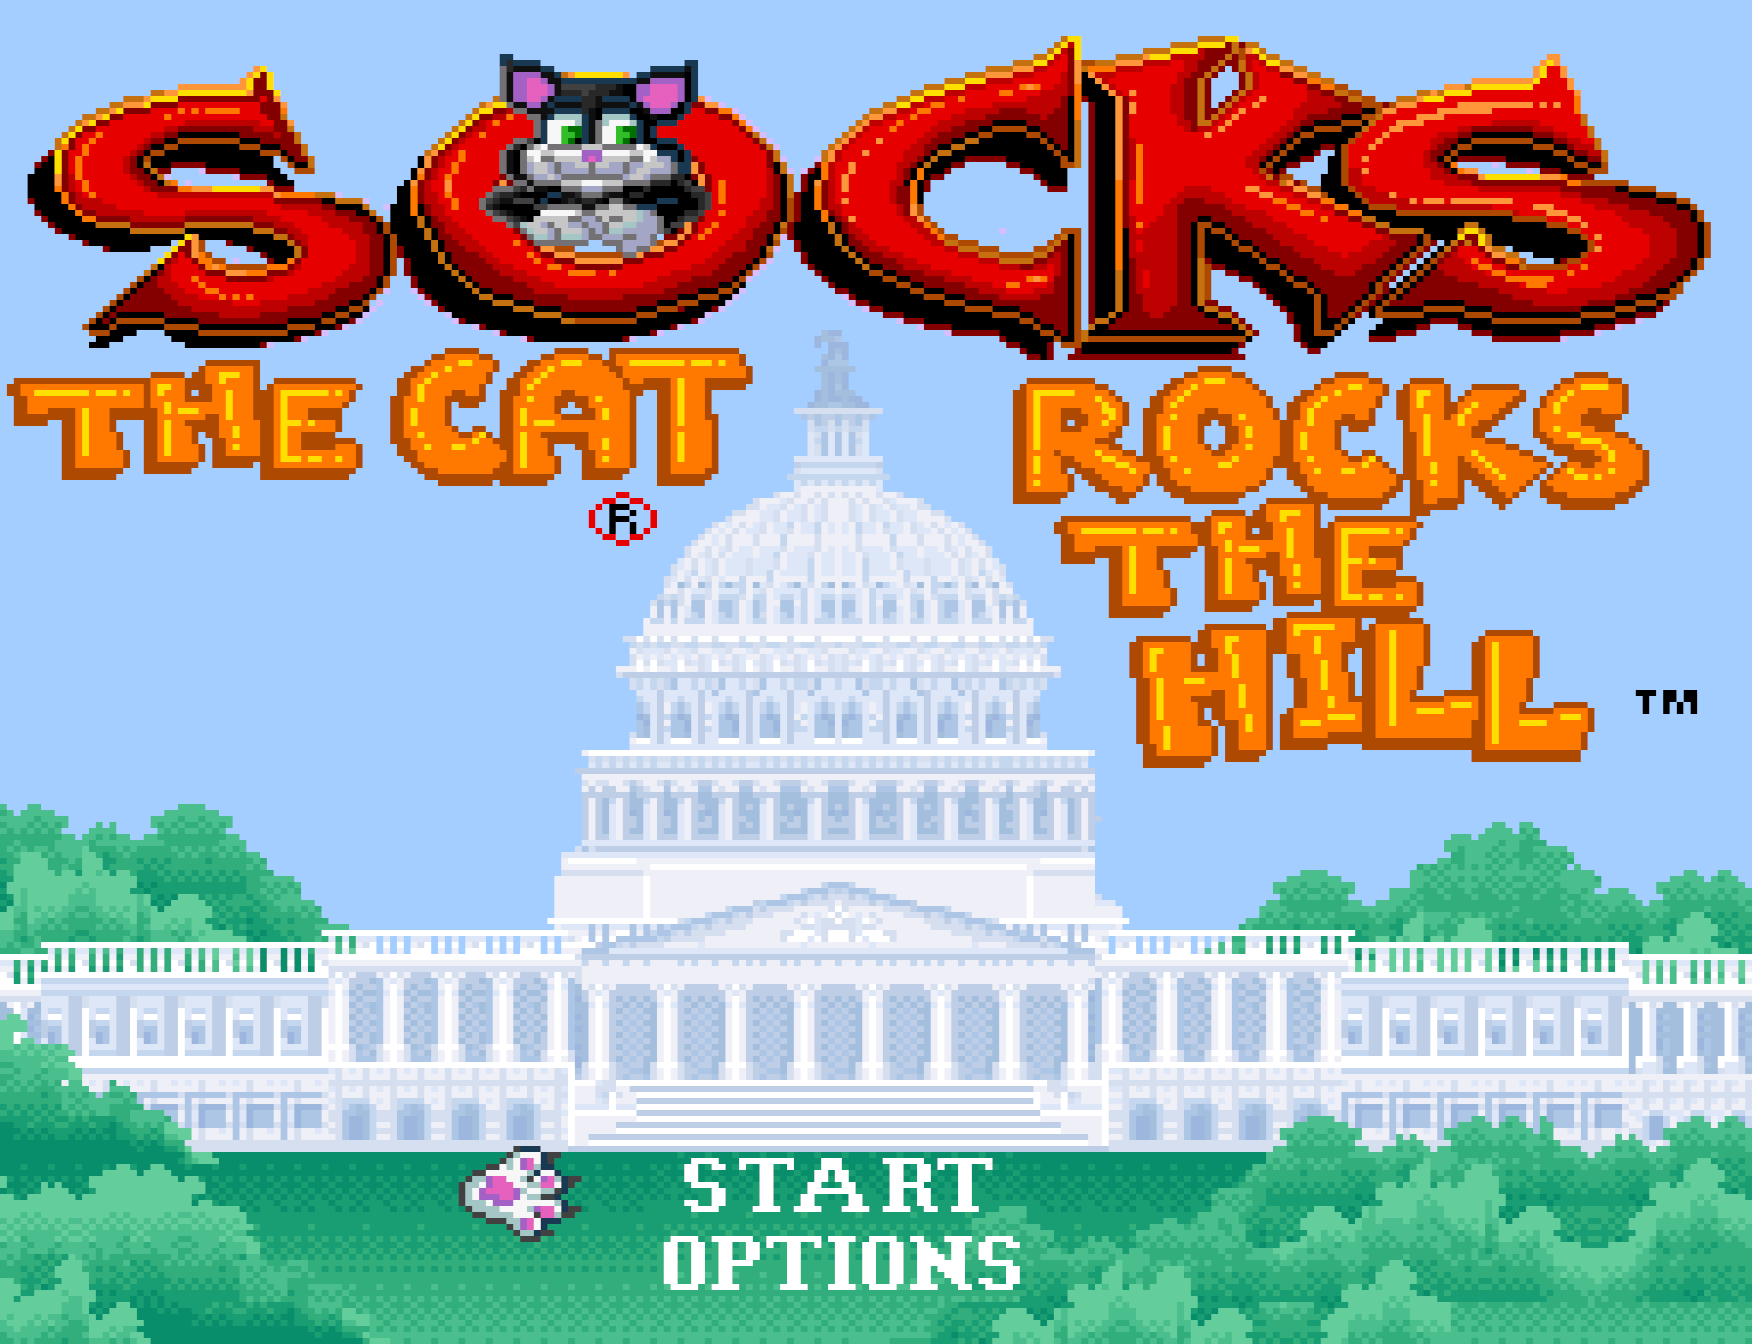 Mascot platformer where you play as Bill Clinton's cat who was kidnapped and must save the world from nuclear disaster. 